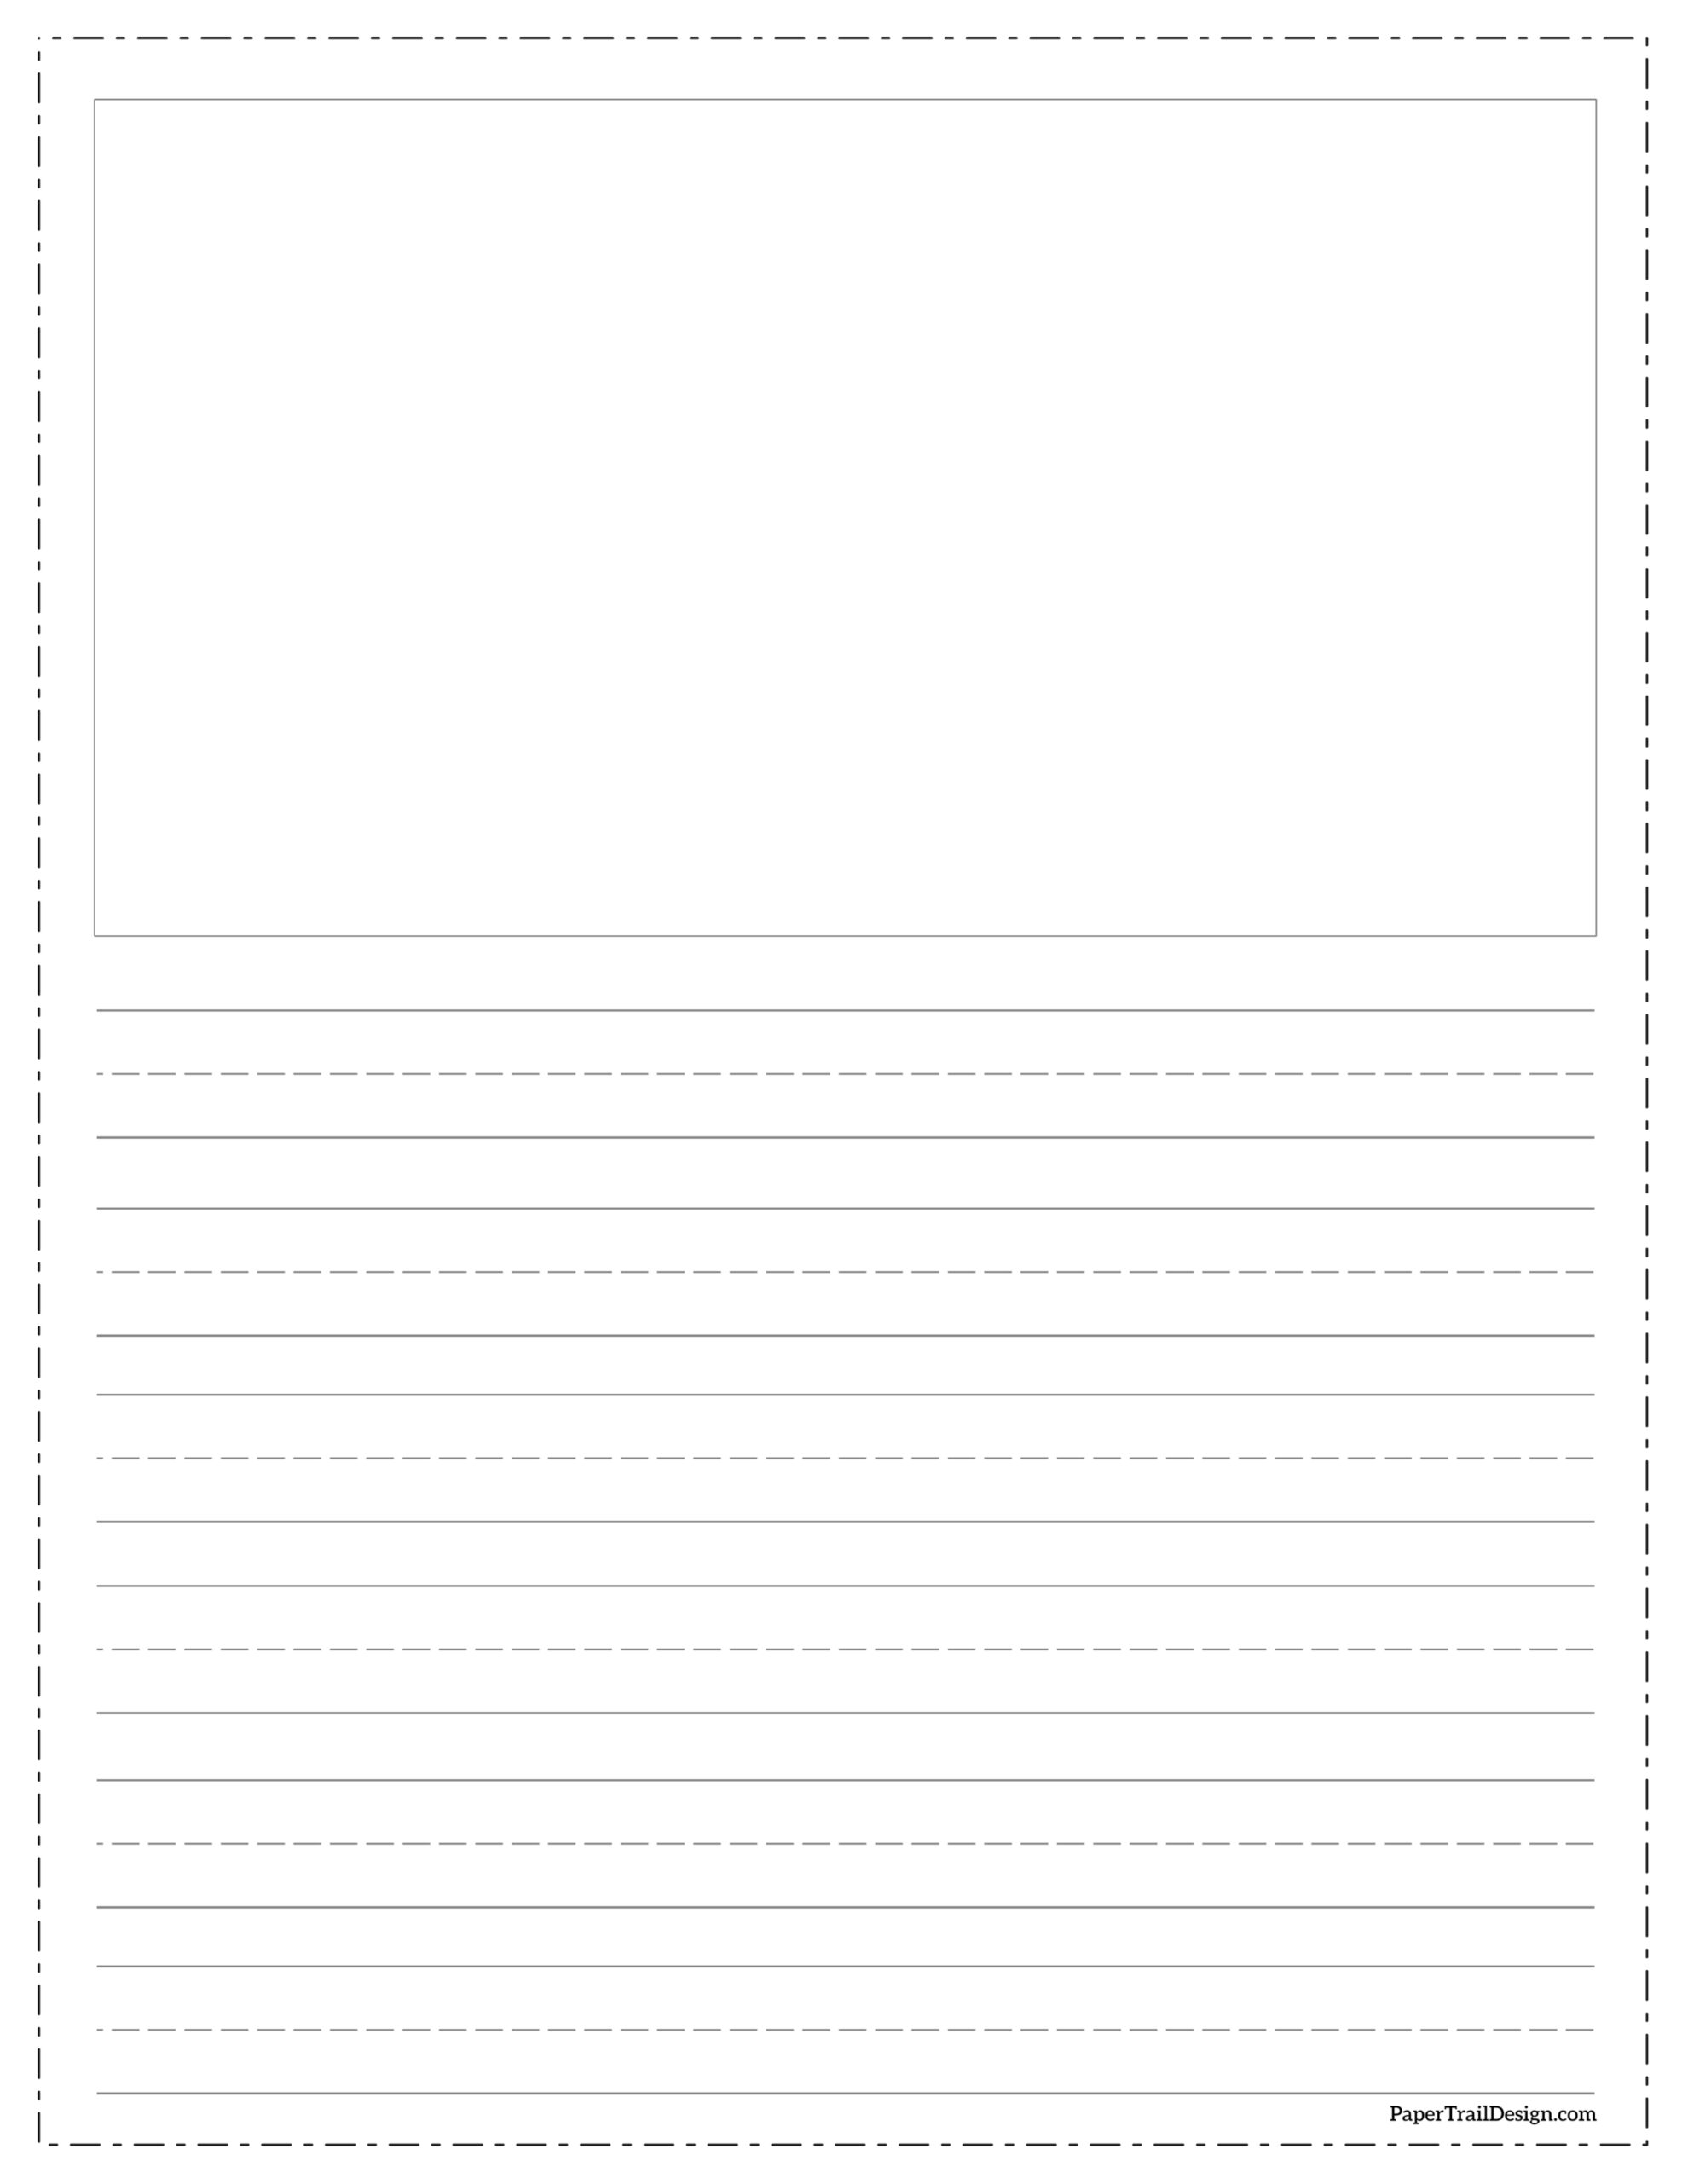 Free Printable Lined Writing Paper with Drawing Box Paper Trail Design